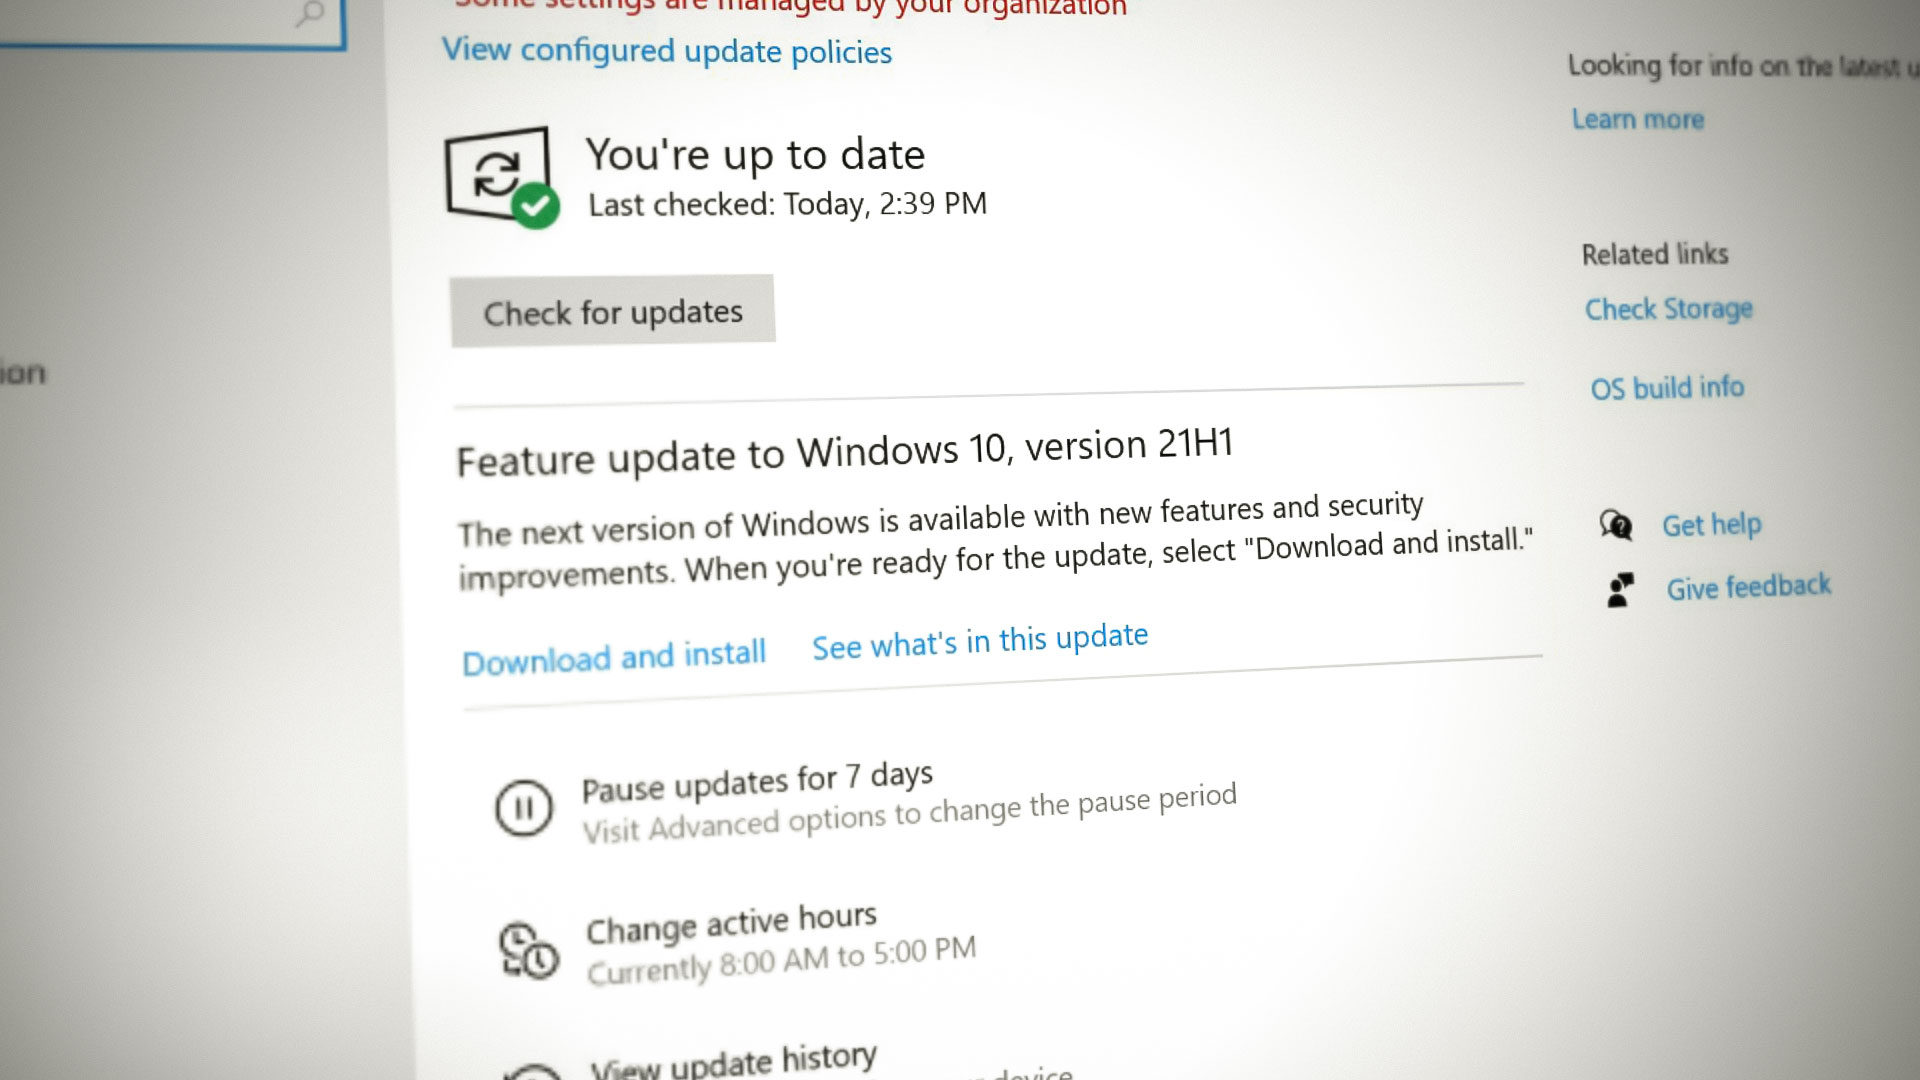 Feature update to windows 10 version 21H1